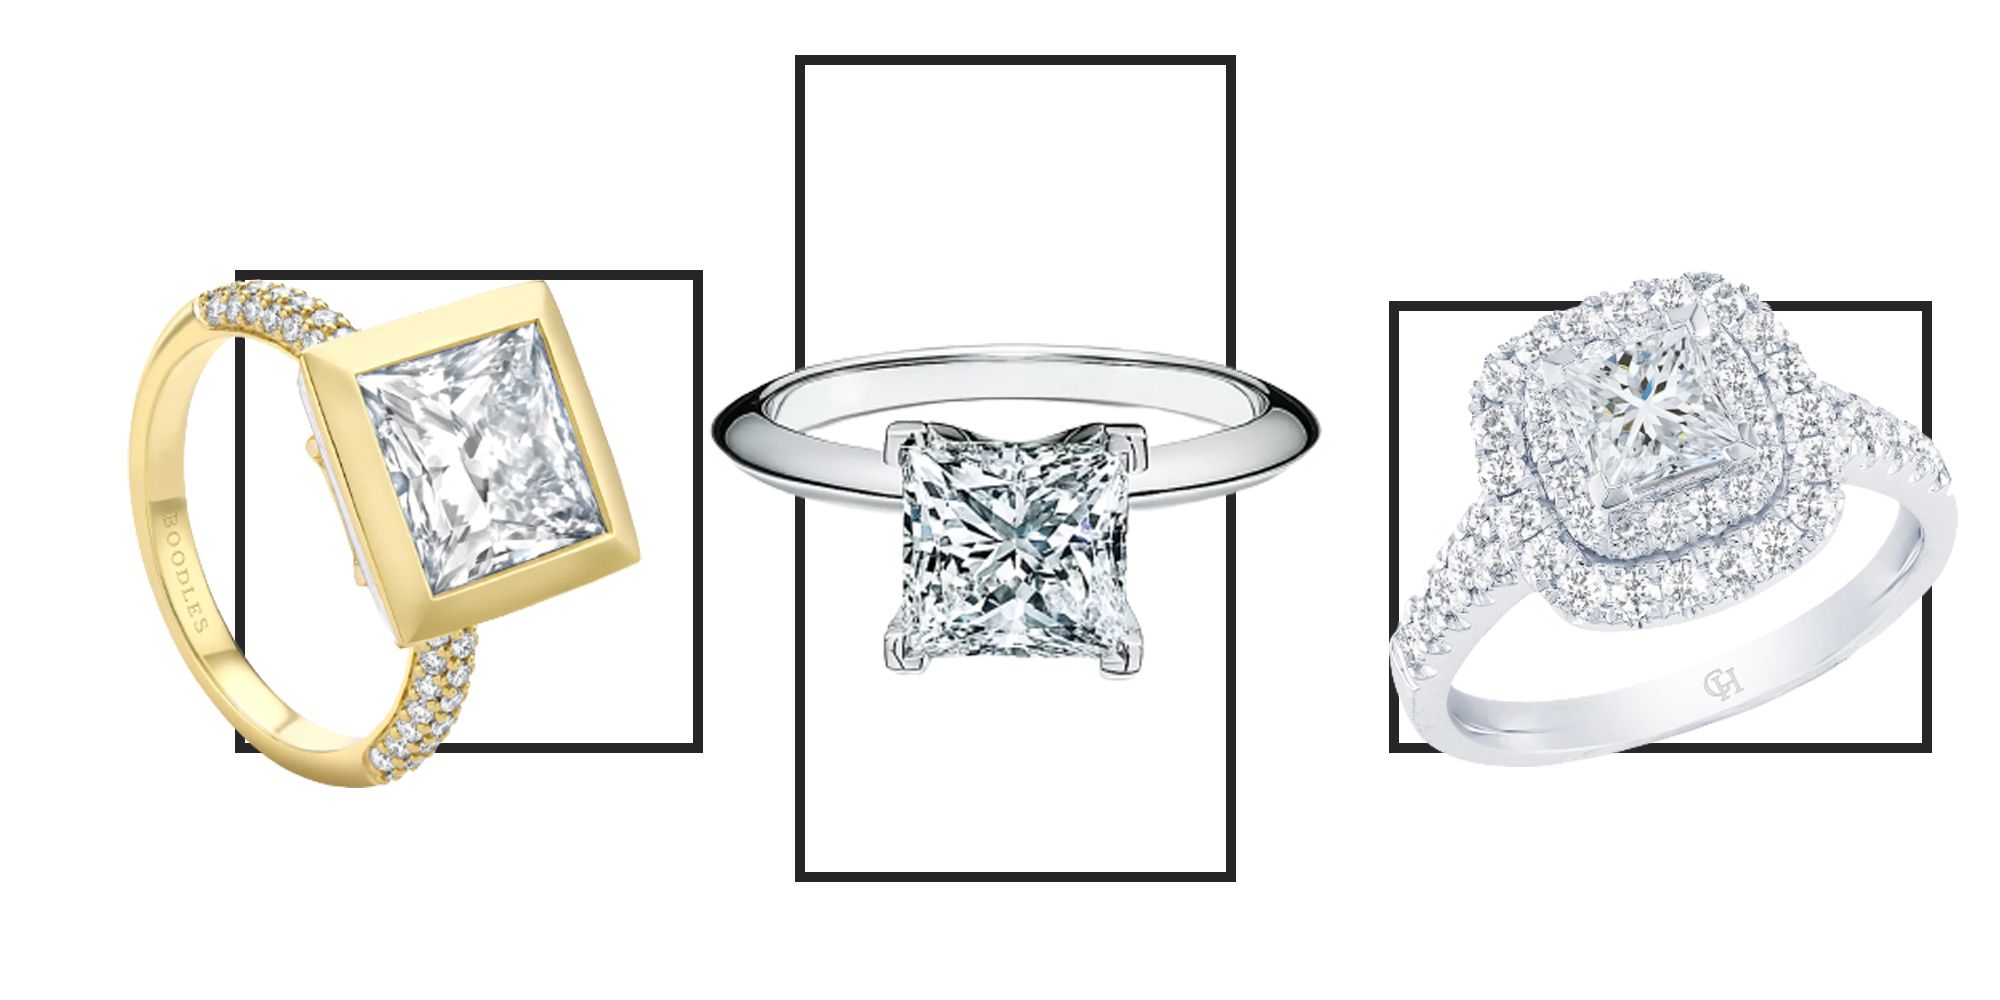 Pre-Owned Tiffany Engagement Rings in Boca Raton: Tiffany & Co Review